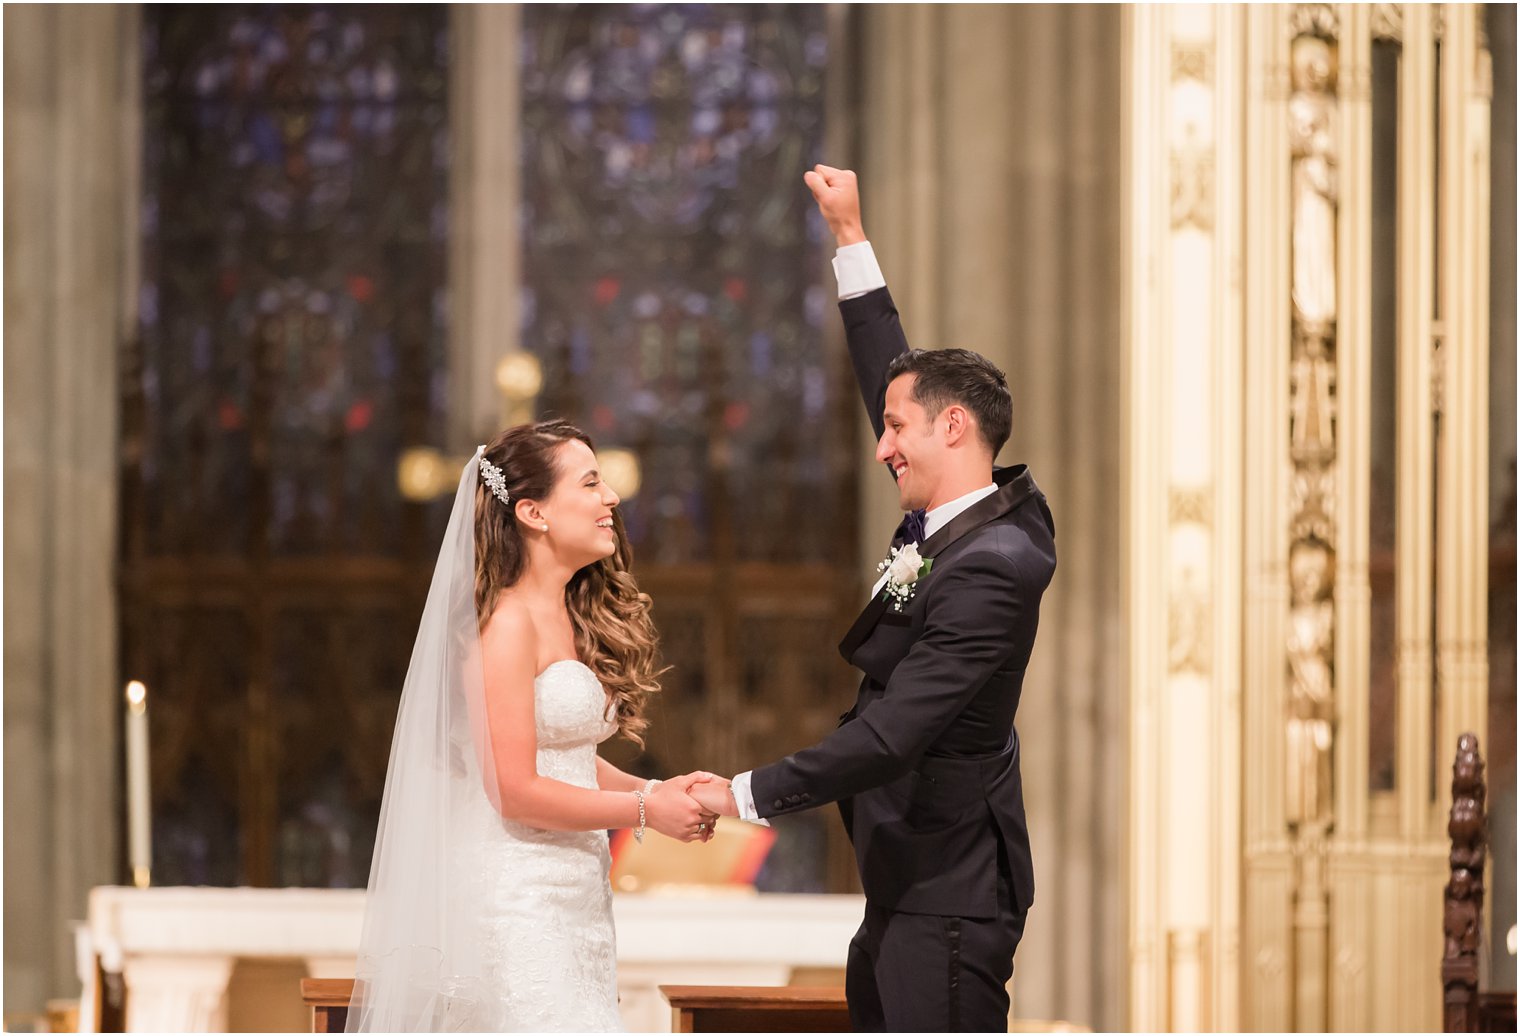 Joyful bride and groom at St. Patrick's Cathedral | Photo by Idalia Photography